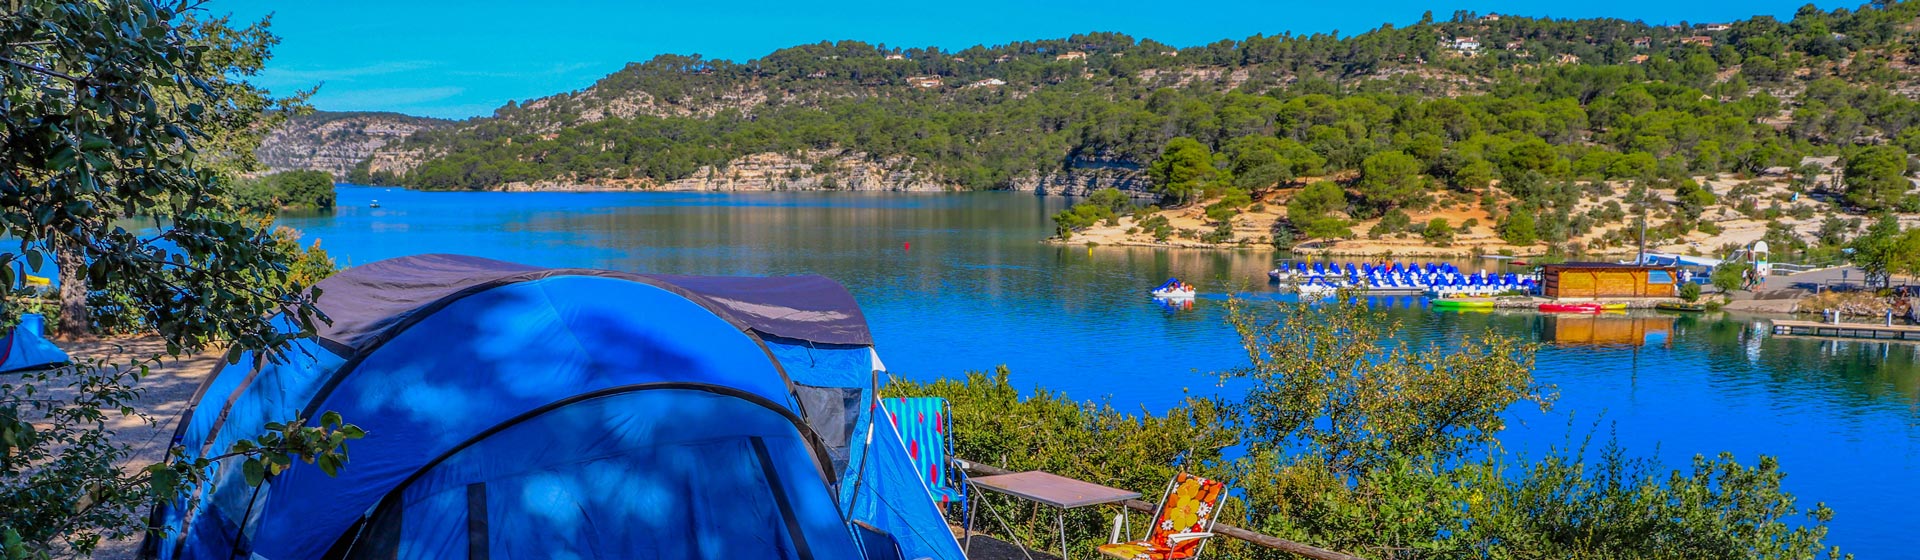 camping le soleil emplacements